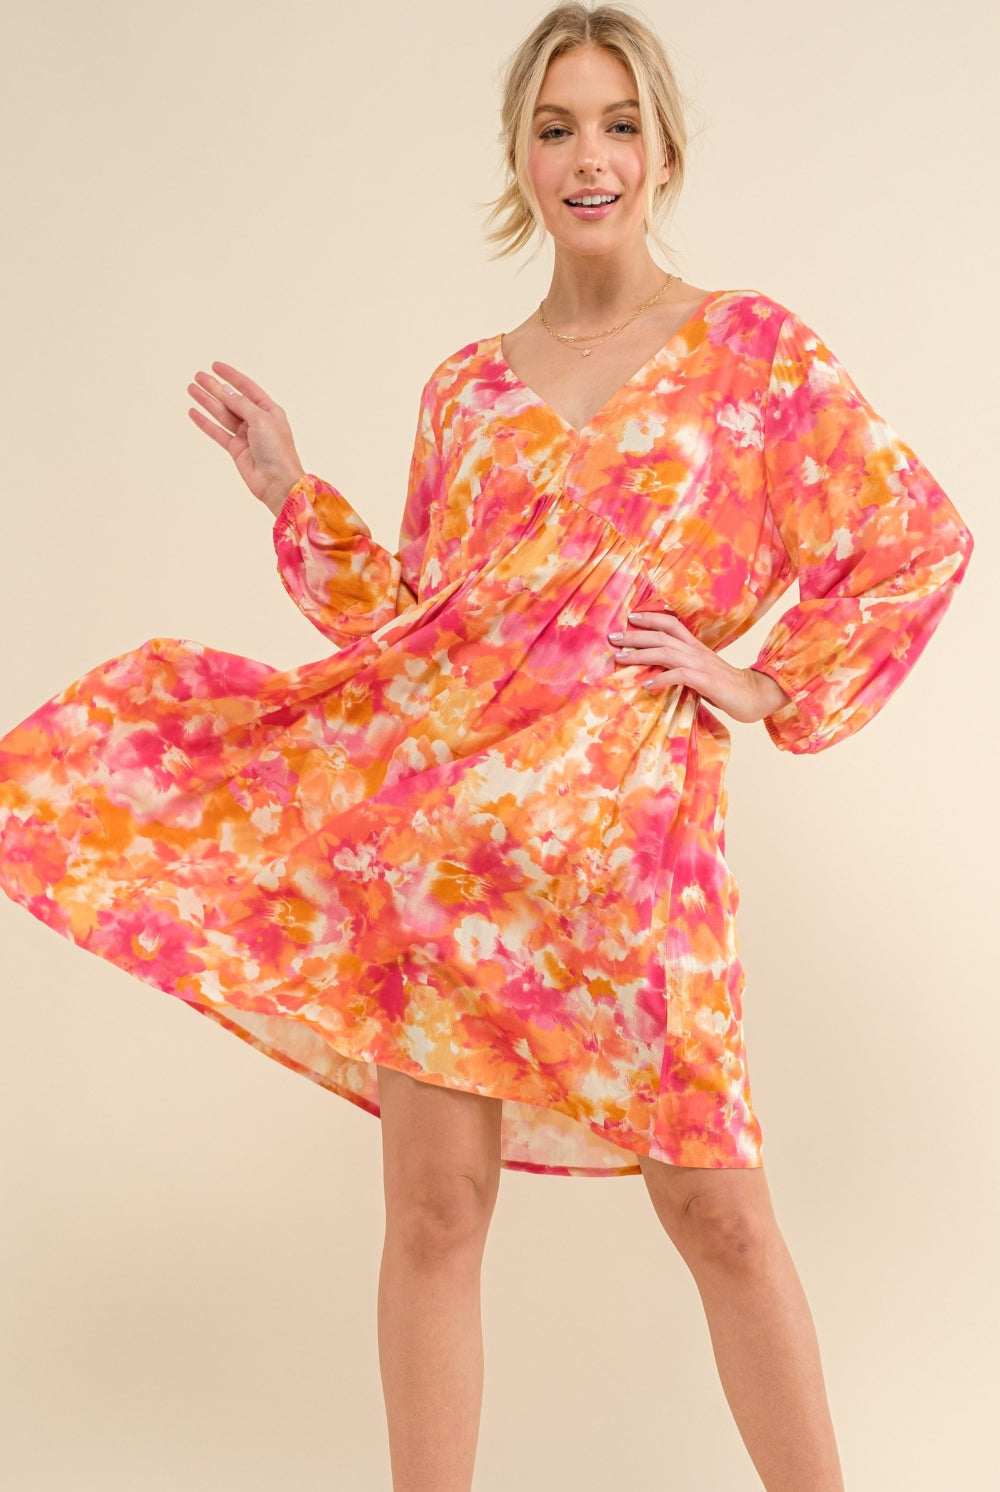 Woman wearing a vibrant floral print long sleeve dress in shades of orange and pink, featuring a tie back detail.